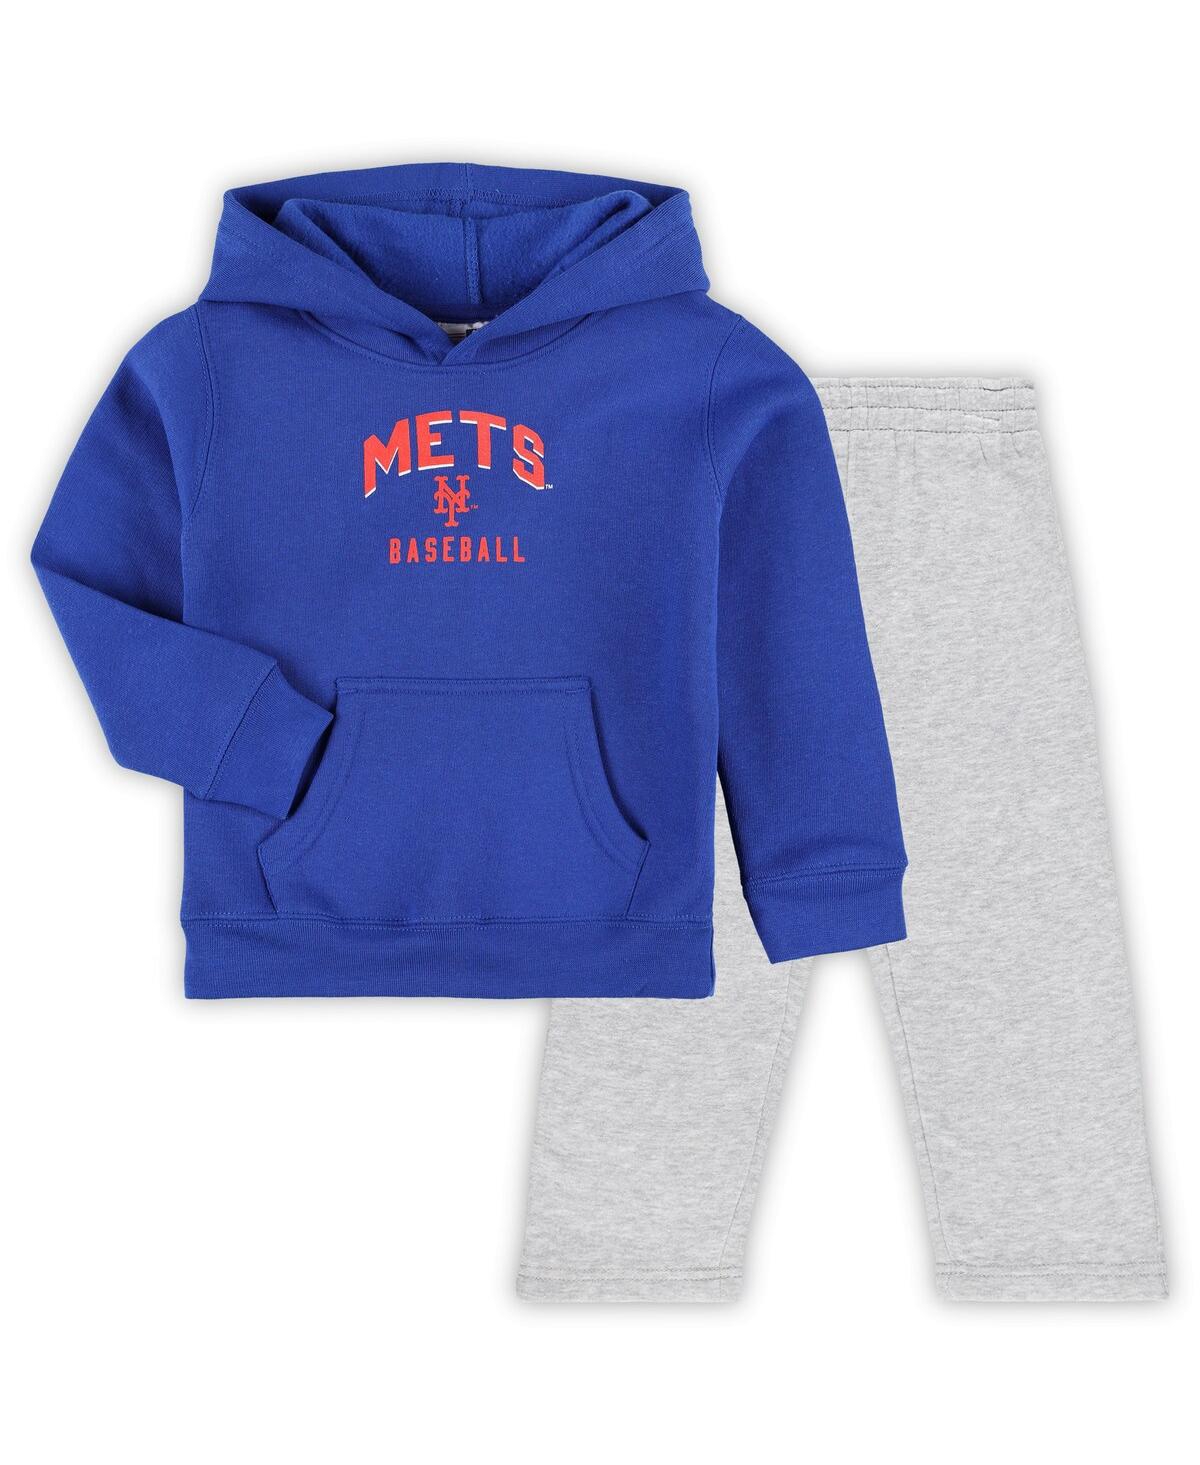 Shop Outerstuff Toddler Boys And Girls Royal, Gray New York Mets Play-by-play Pullover Fleece Hoodie And Pants Set In Royal,gray